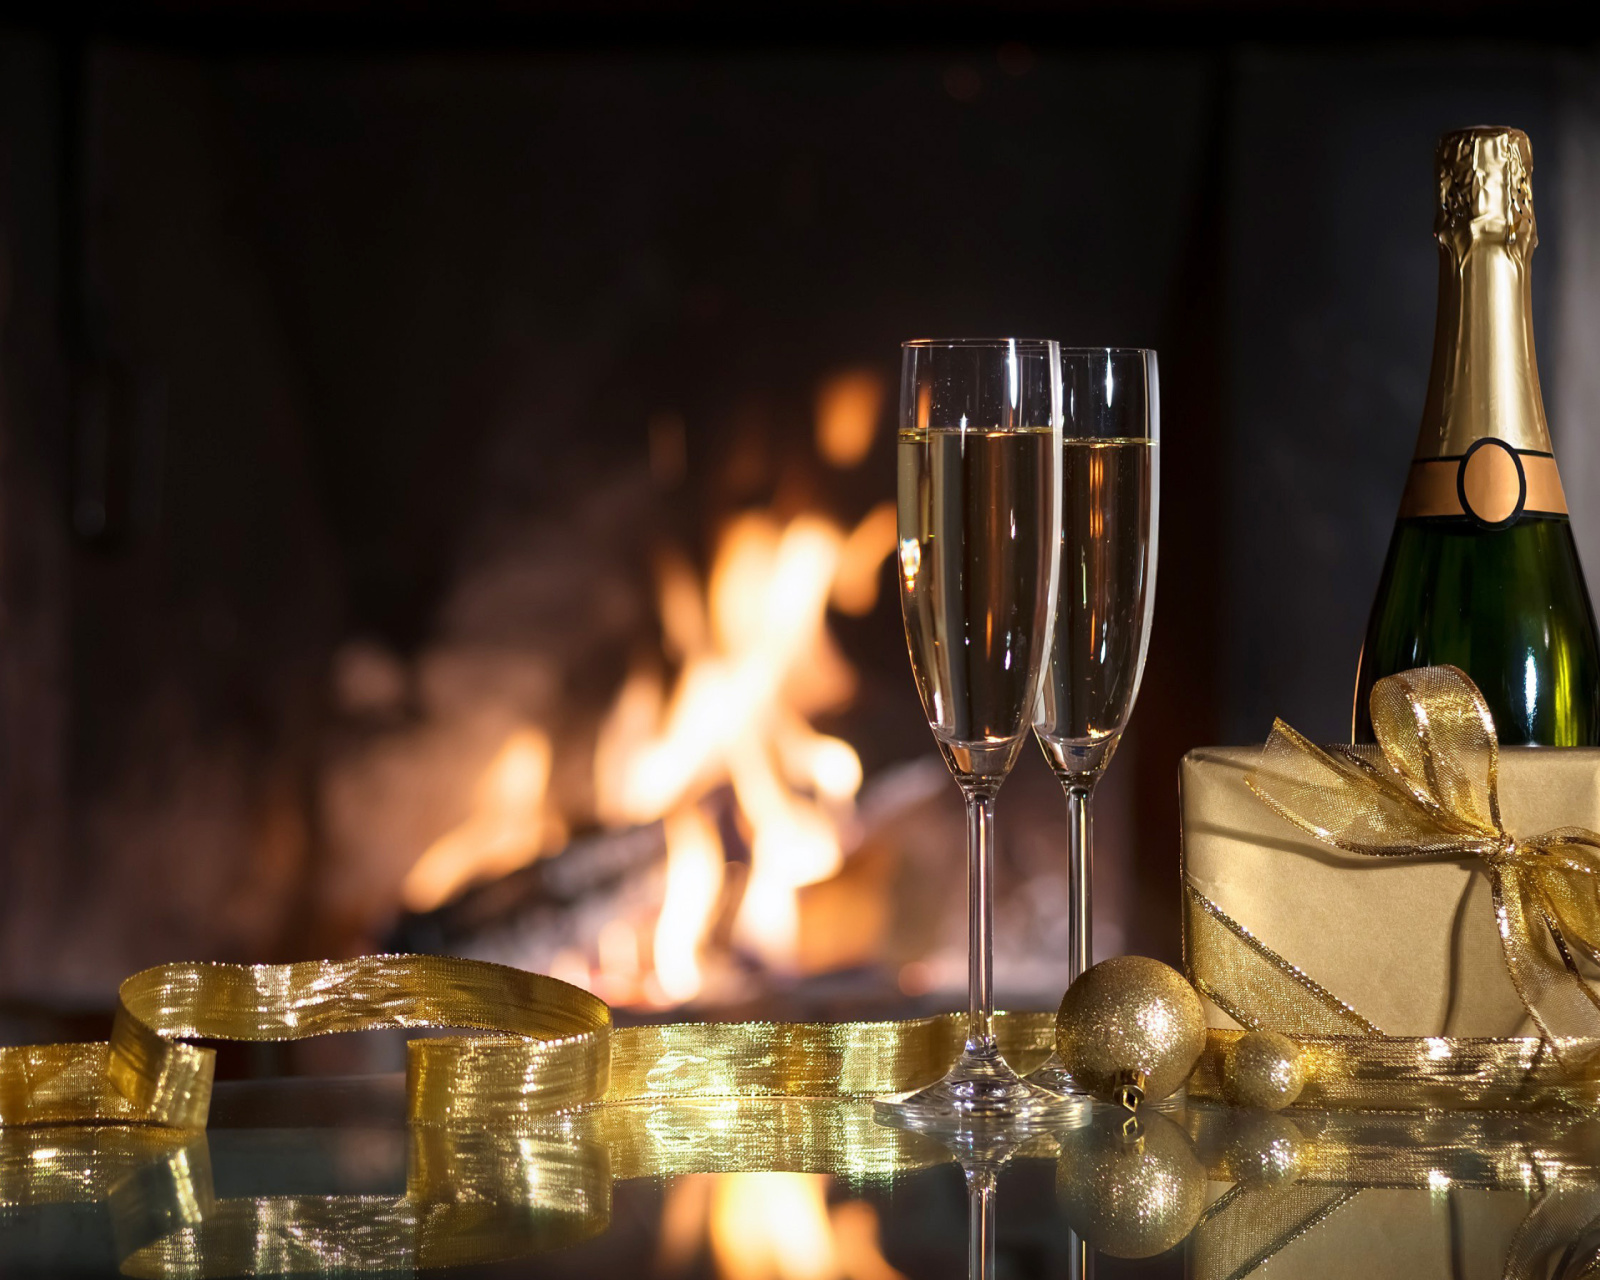 Das Champagne and Fireplace Wallpaper 1600x1280